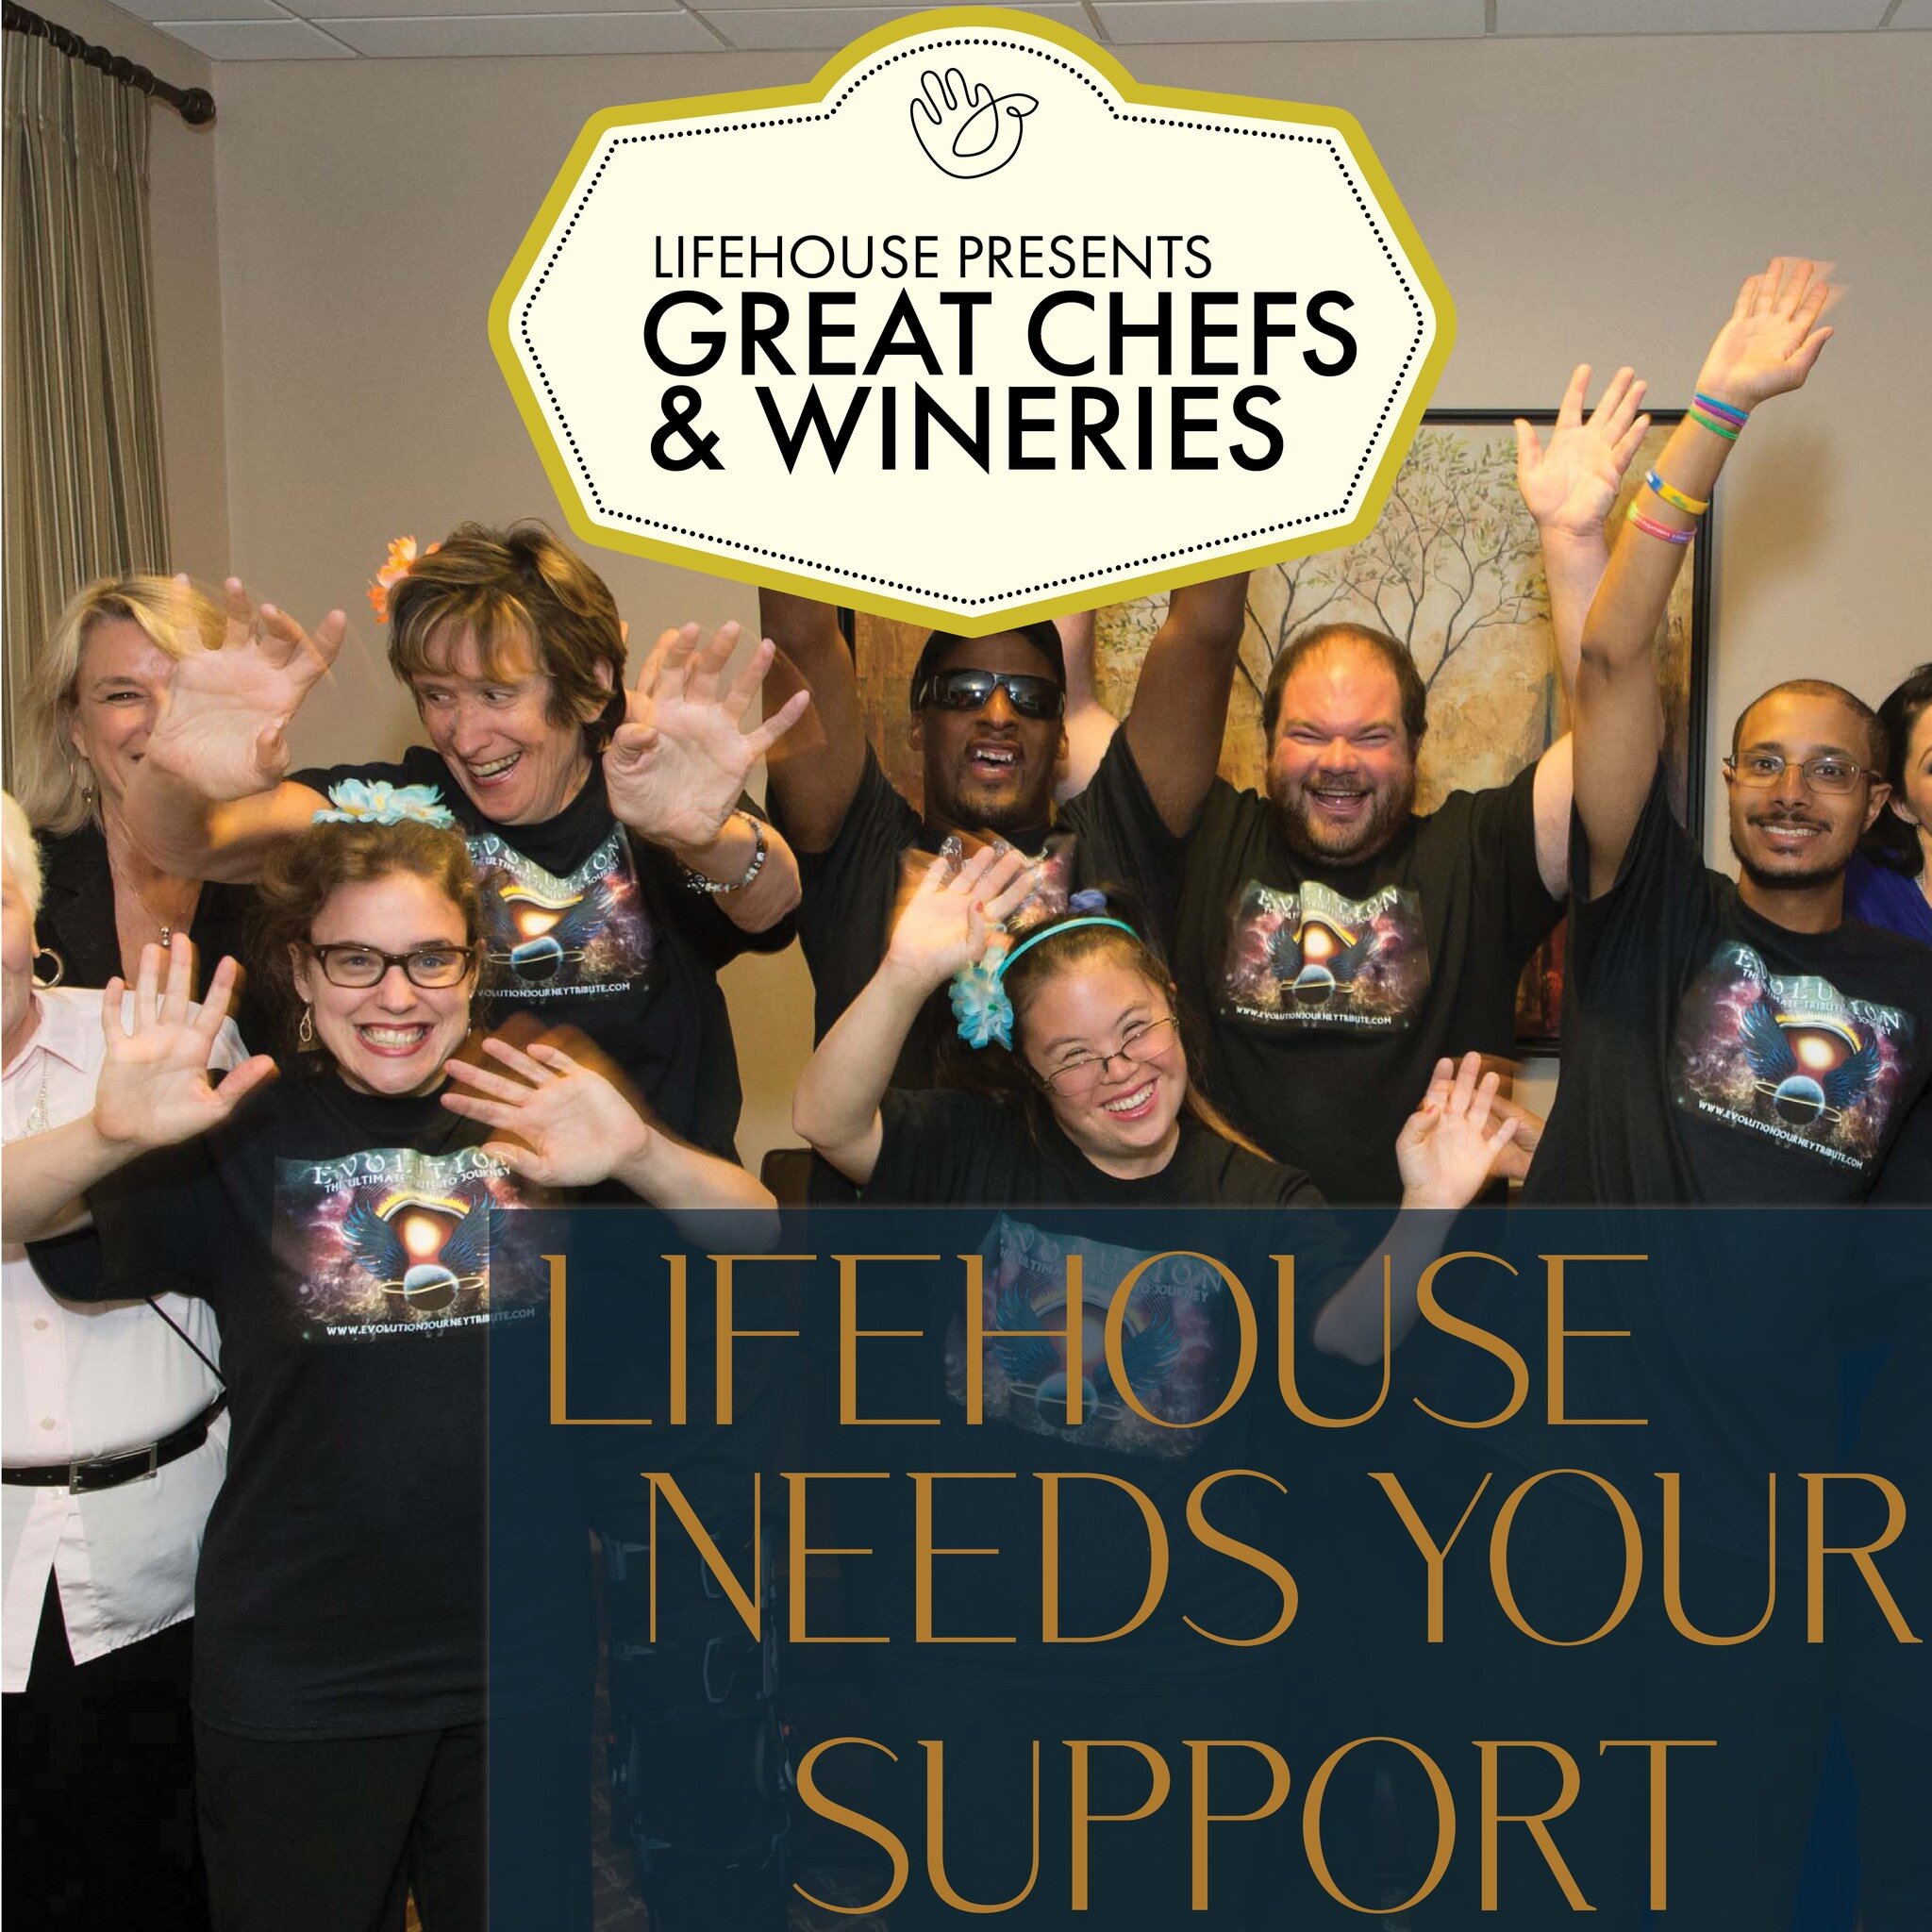 There is still time to support Lifehouse. Let's get the bidding frenzy going and help lift up people with intellectual and developmental disabilities on our community! 
Our Virtual Auction closes at 9pm TONIGHT!
💥👆 #linkinbio👆 💥

#charityauction 